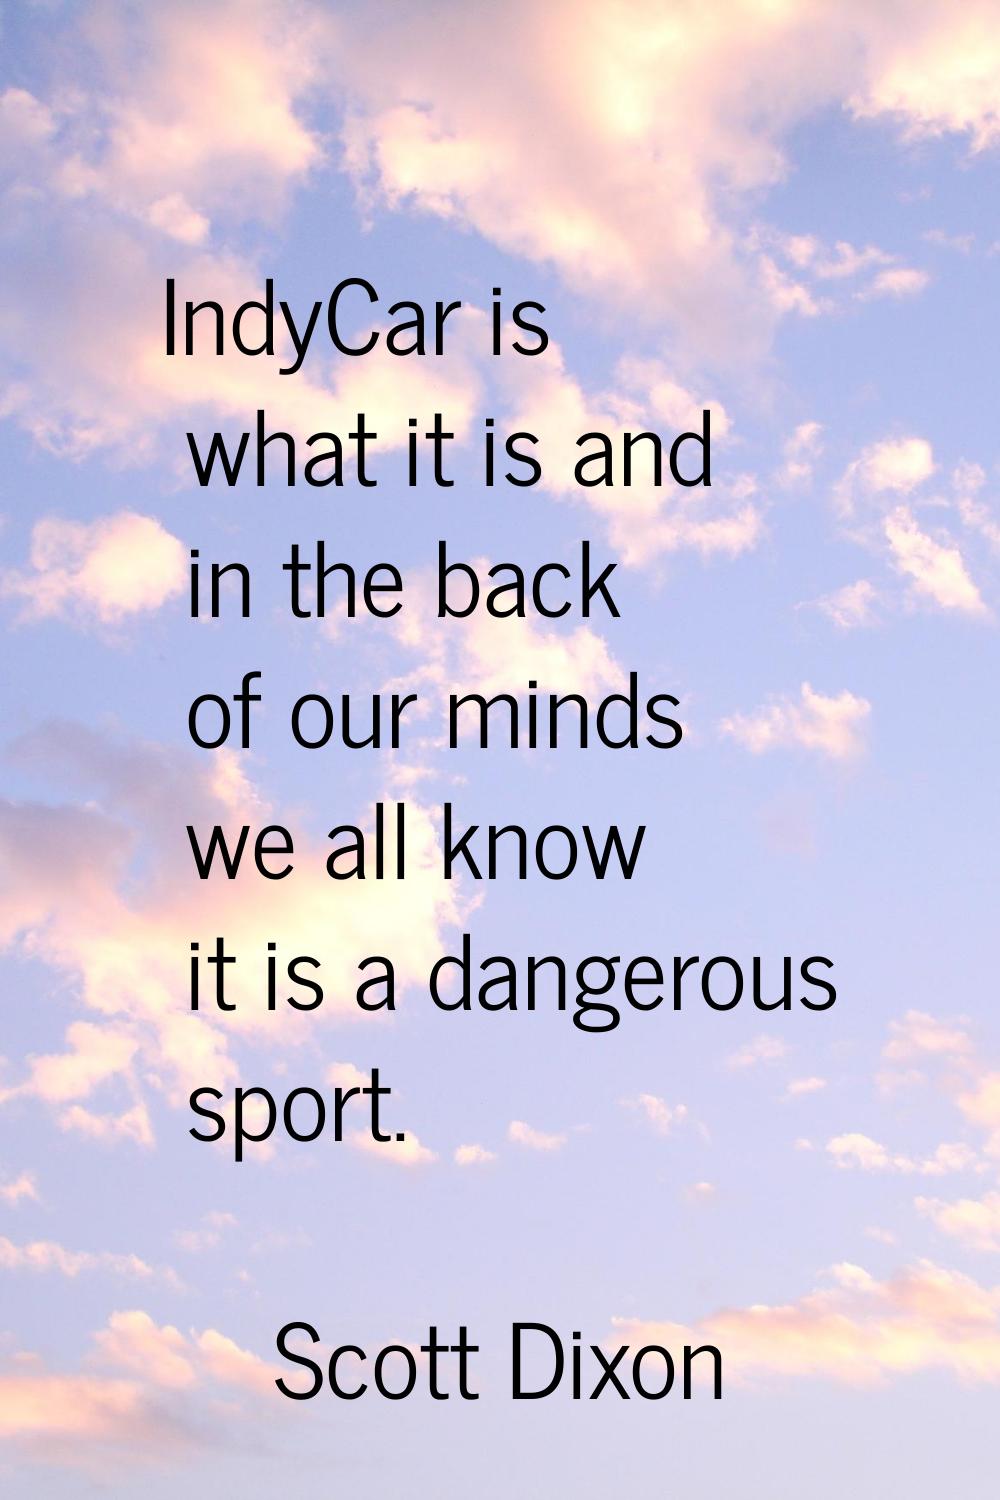 IndyCar is what it is and in the back of our minds we all know it is a dangerous sport.